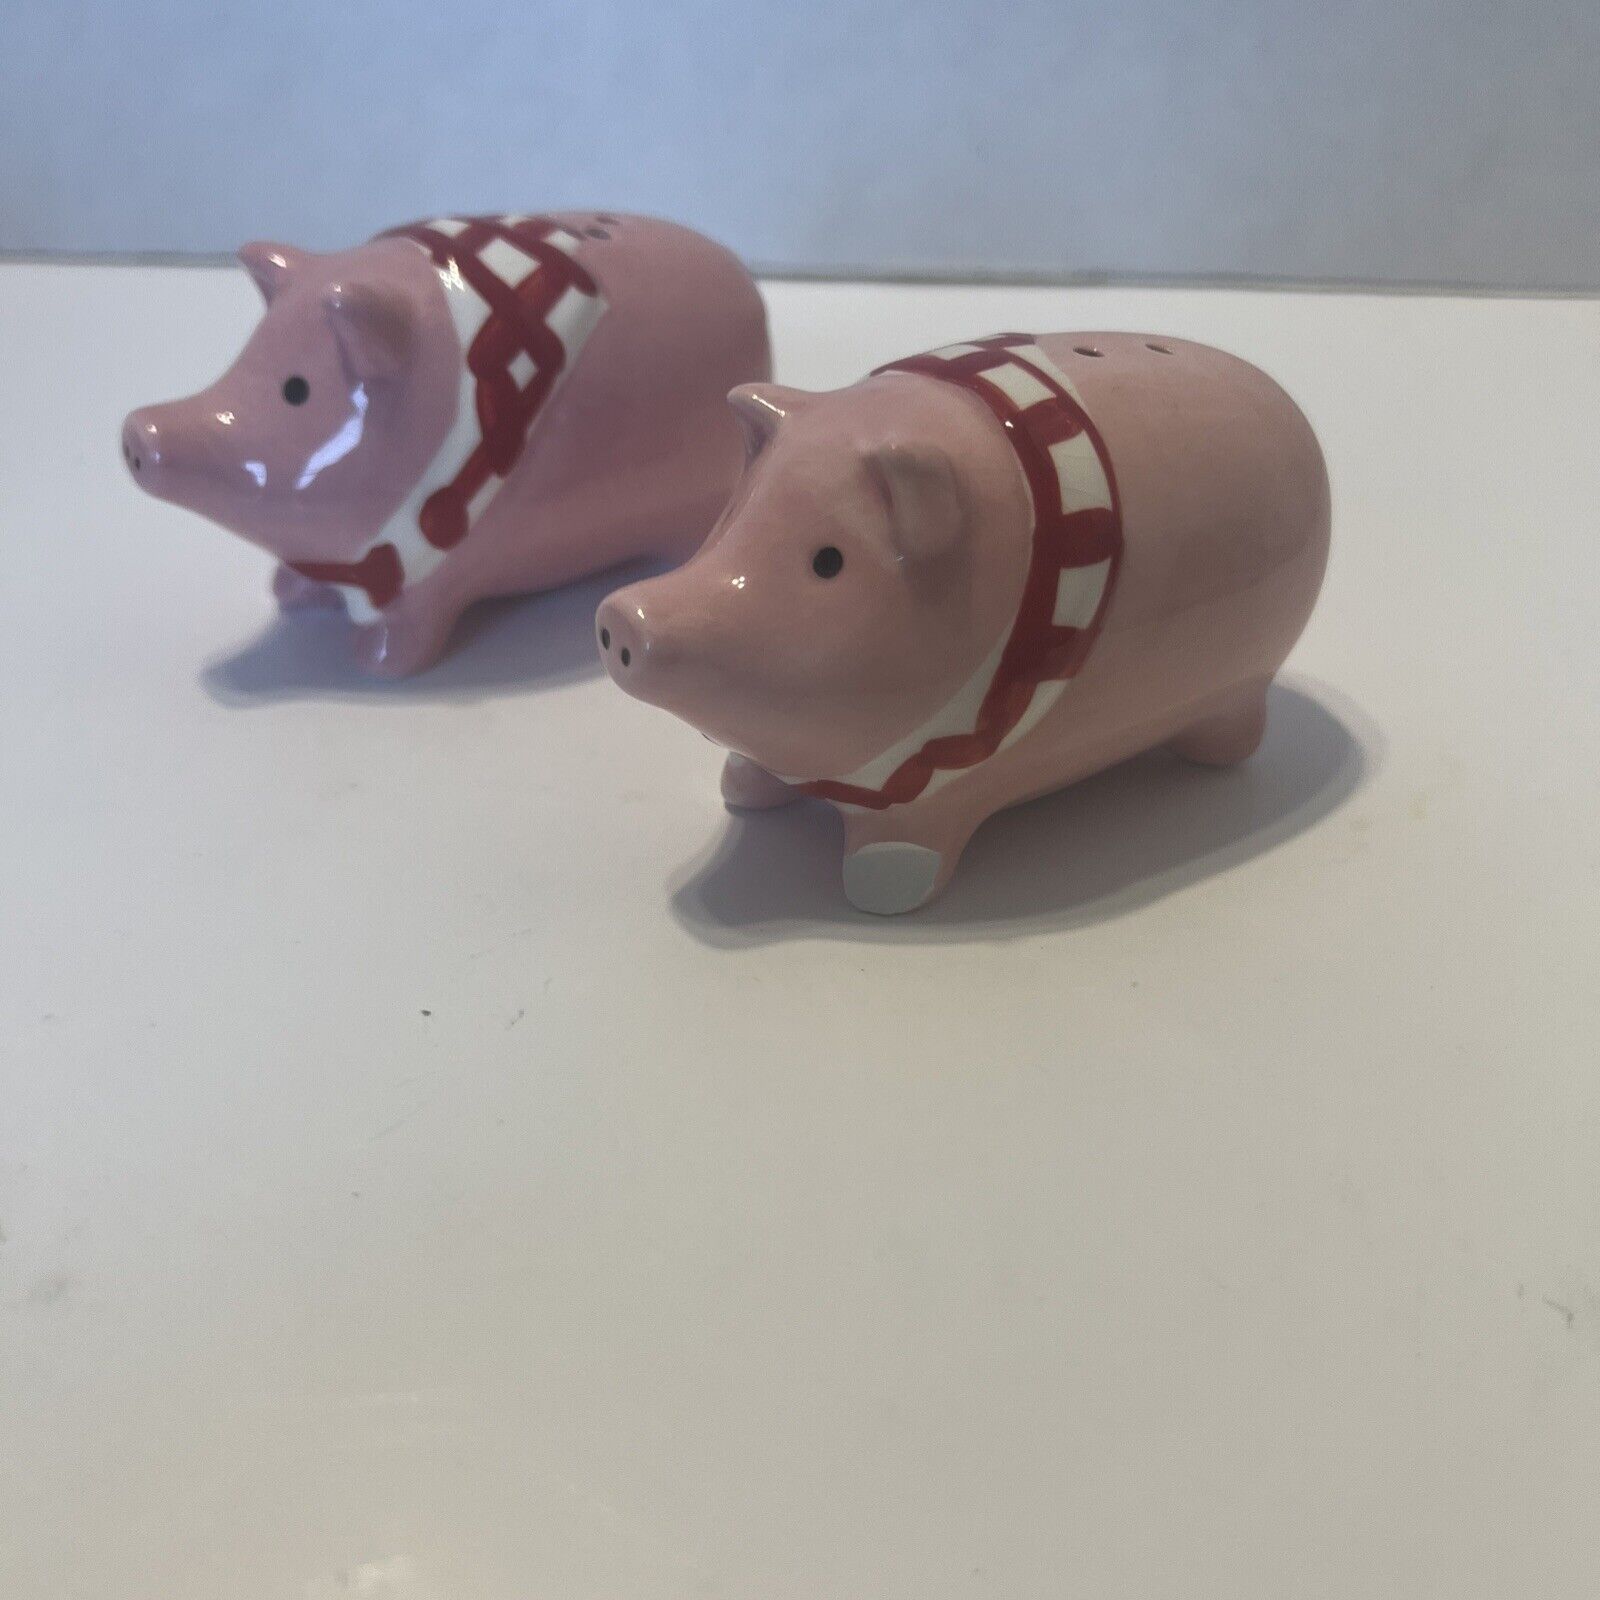 Vintage Pink Pig with Red w/ White Checkered Bandanas Salt and Pepper Shakers